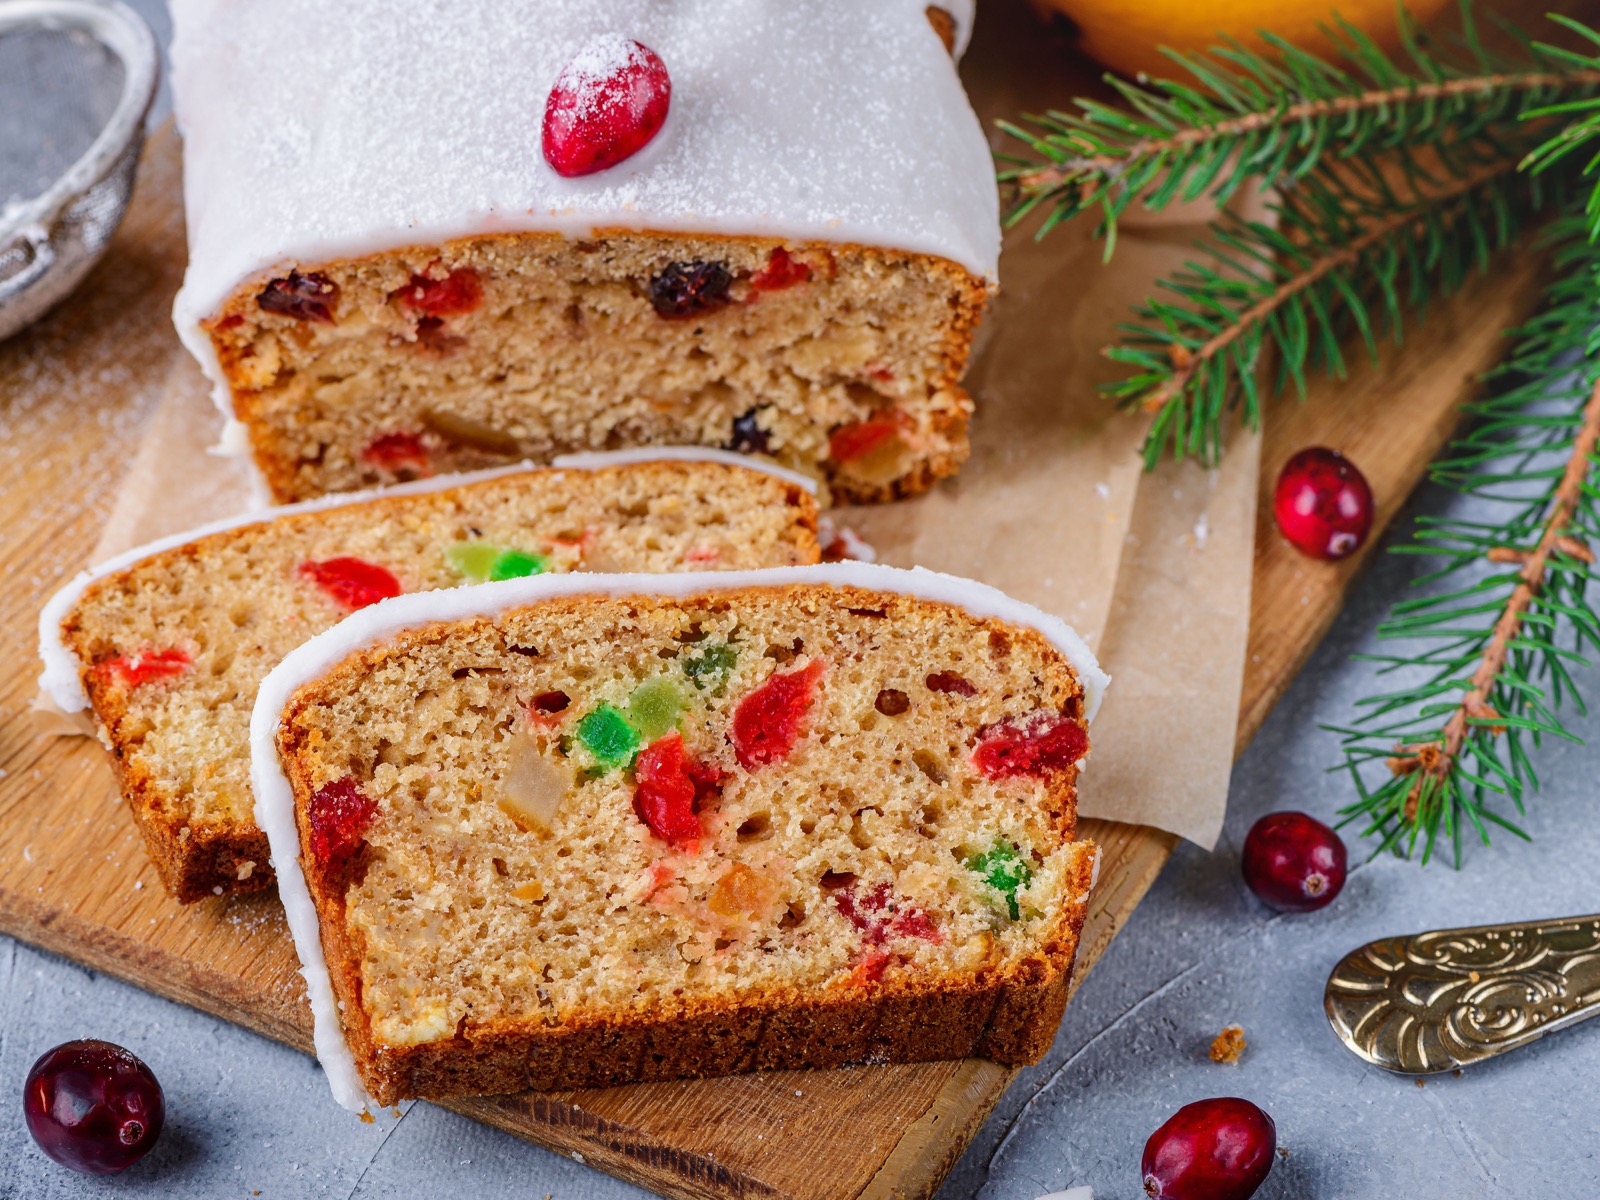 Say “Yuck” Or “Yum” to These Foods and We’ll Determine Your Exact Age Fruitcake